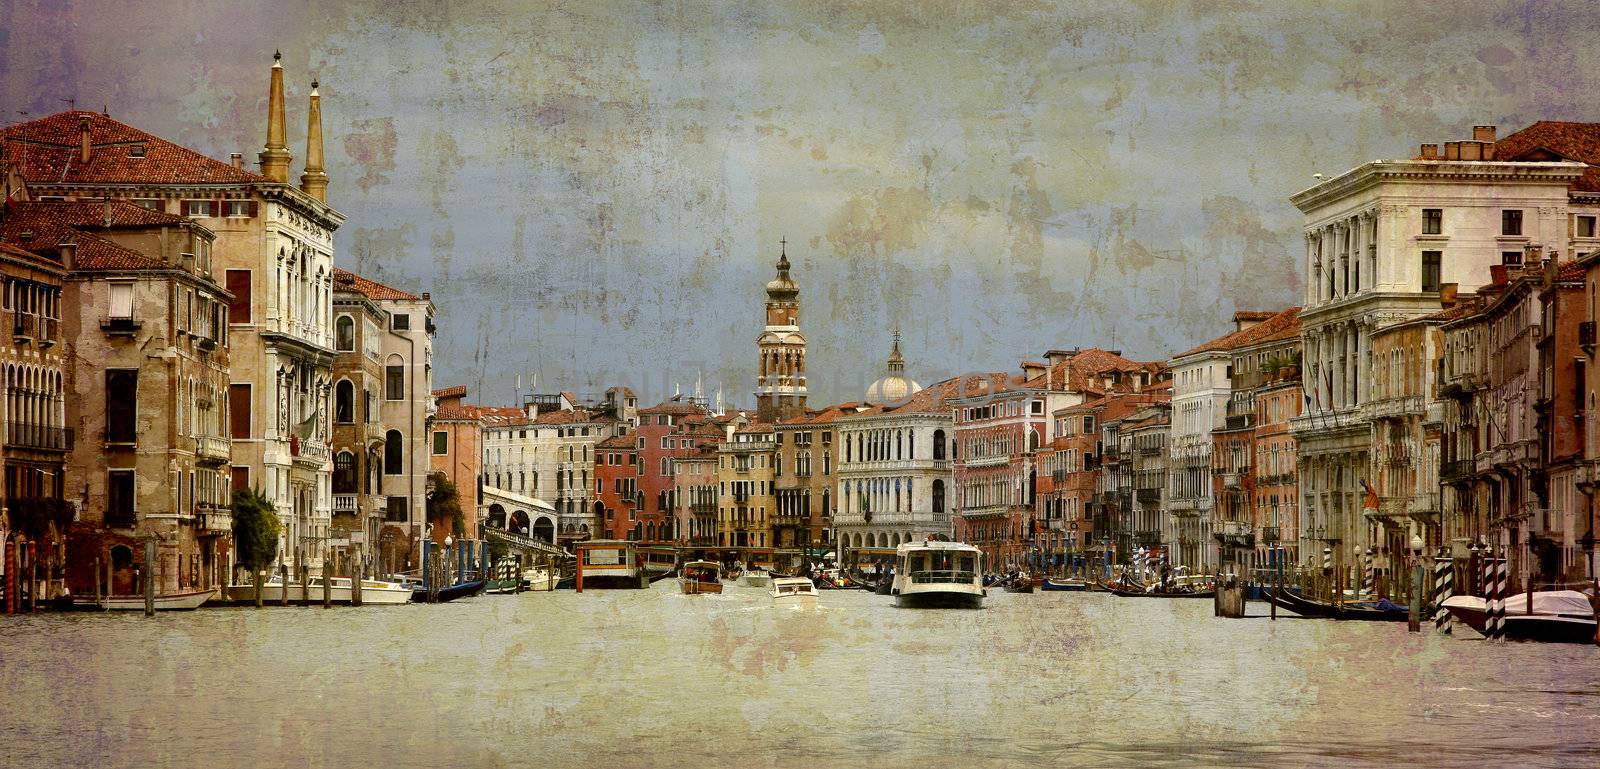 Grand Canal panorama by ABCDK